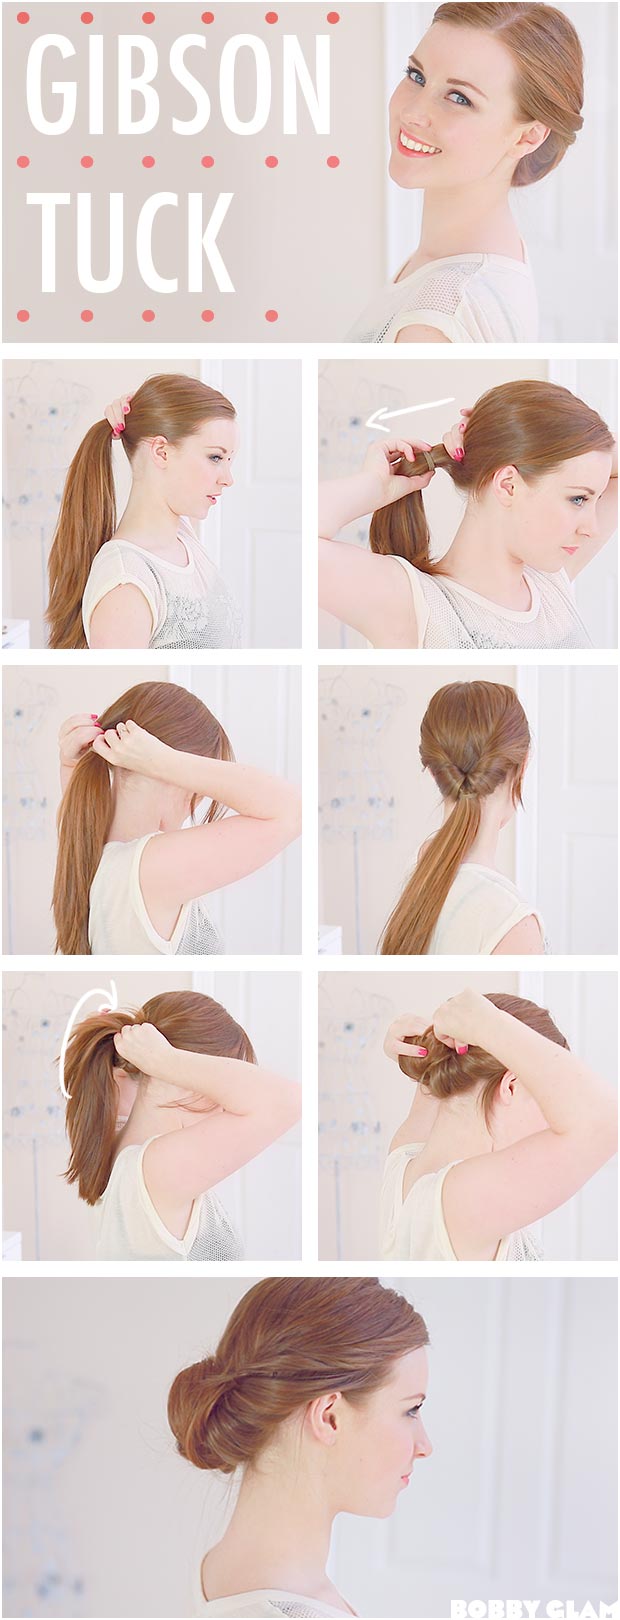 Gibson Tuck Hairstyle Tutorial